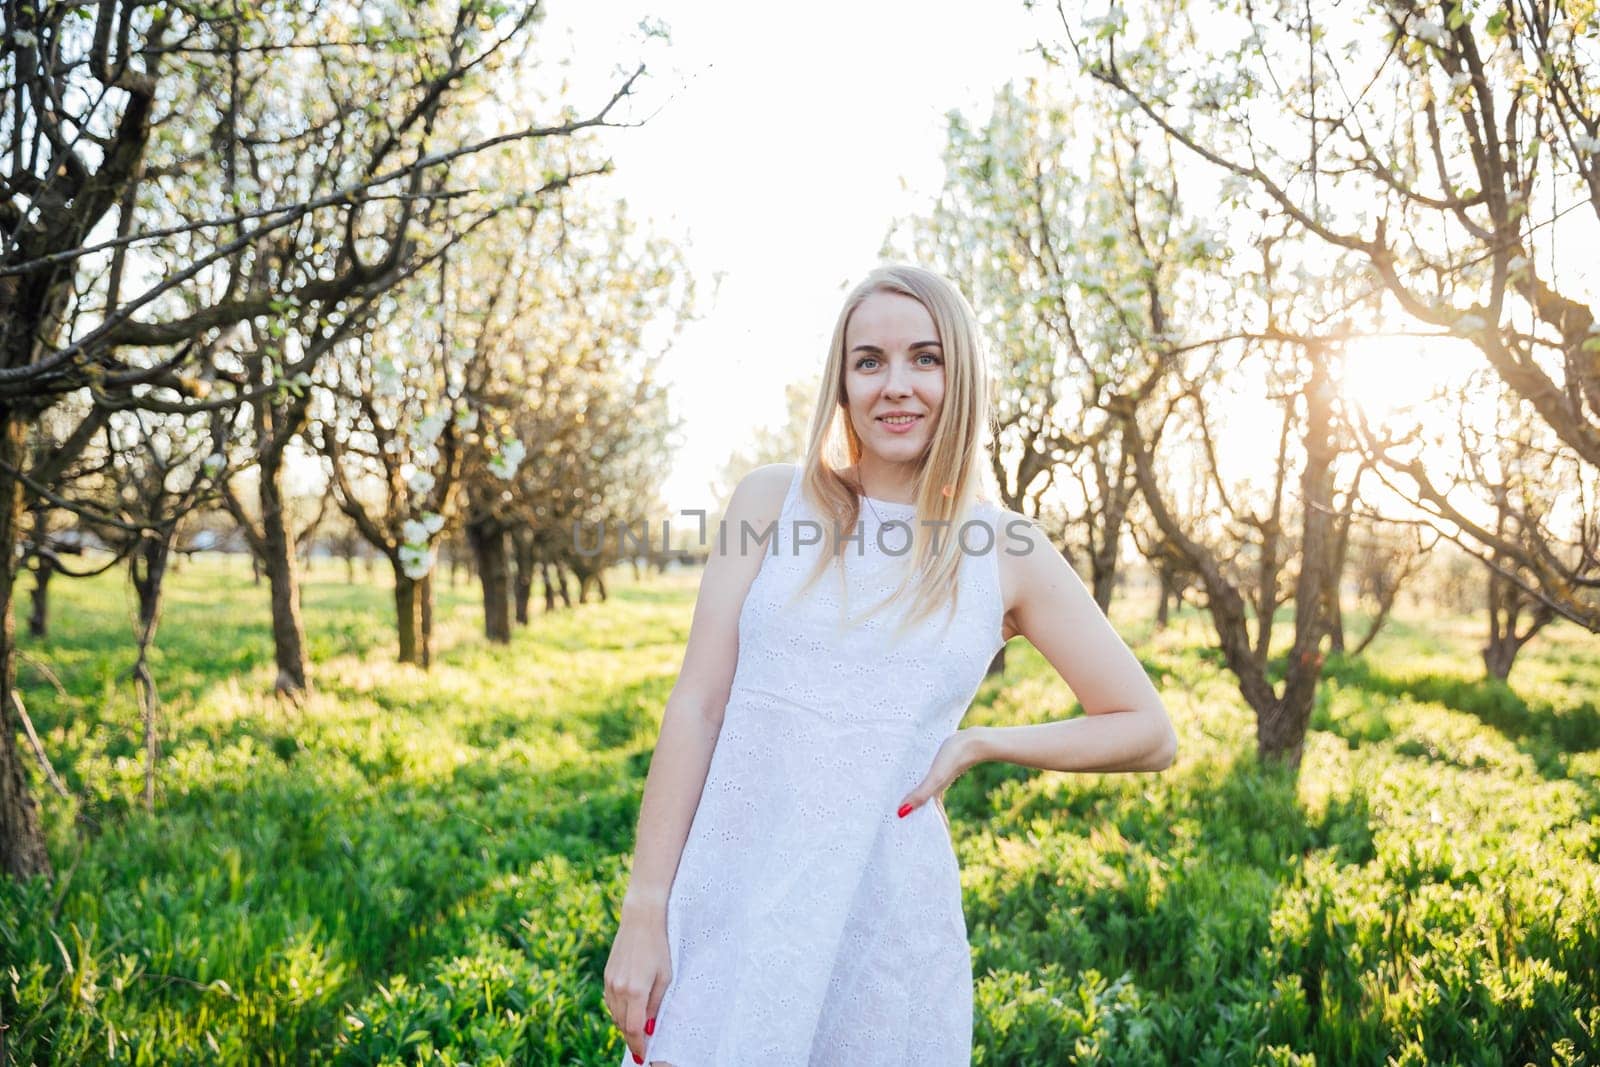 Blonde in the park in nature on a walk on vacation by Simakov